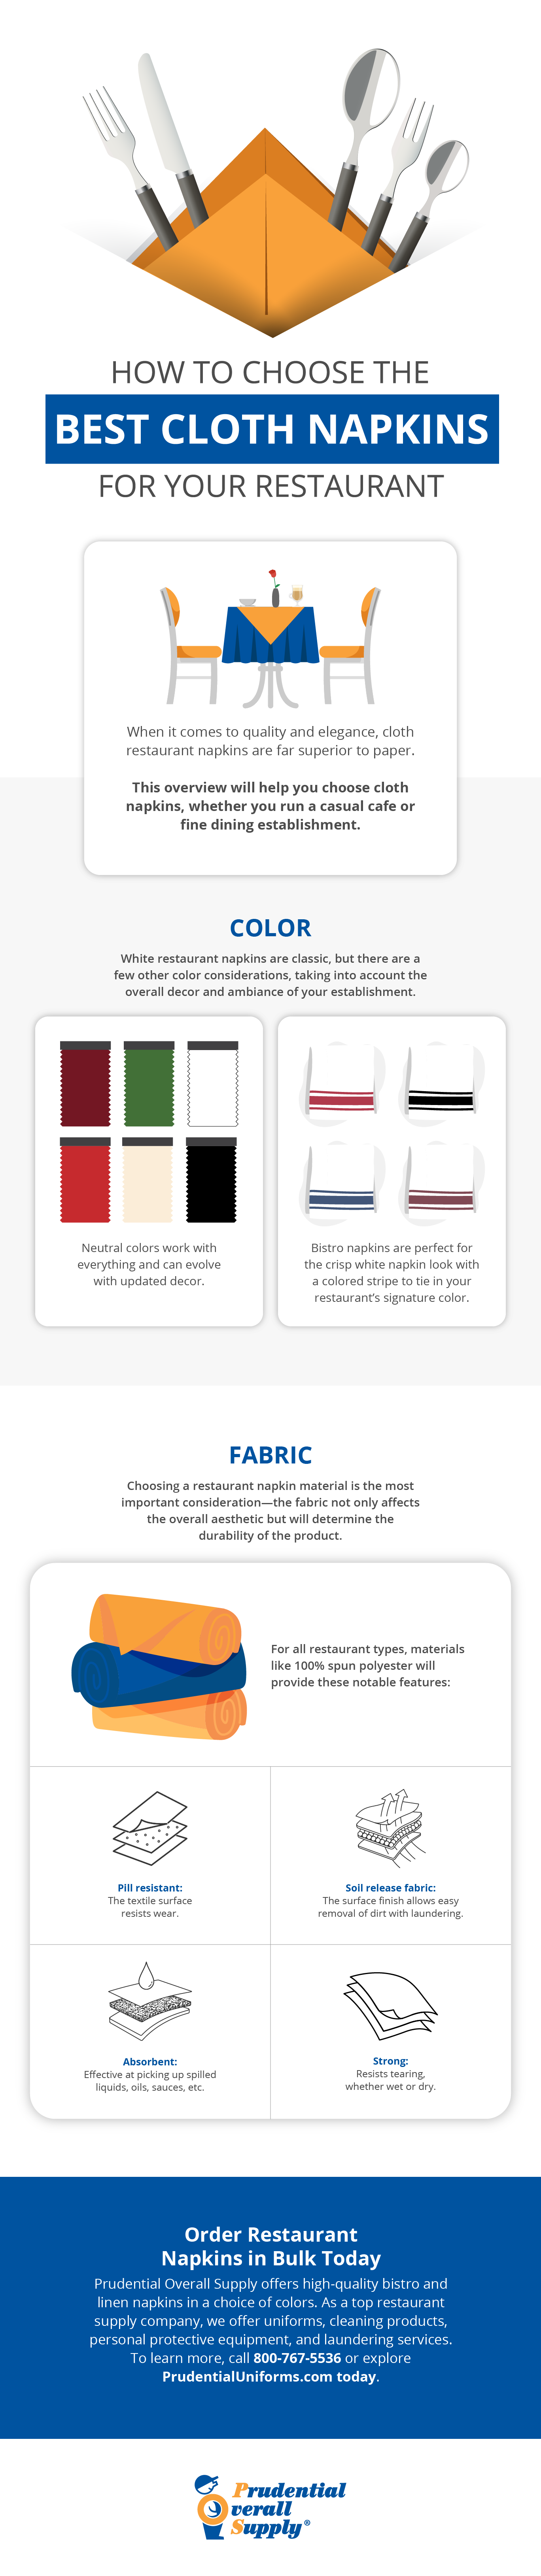 How to Choose the Best Cloth Napkins for Your Restaurant Infographic